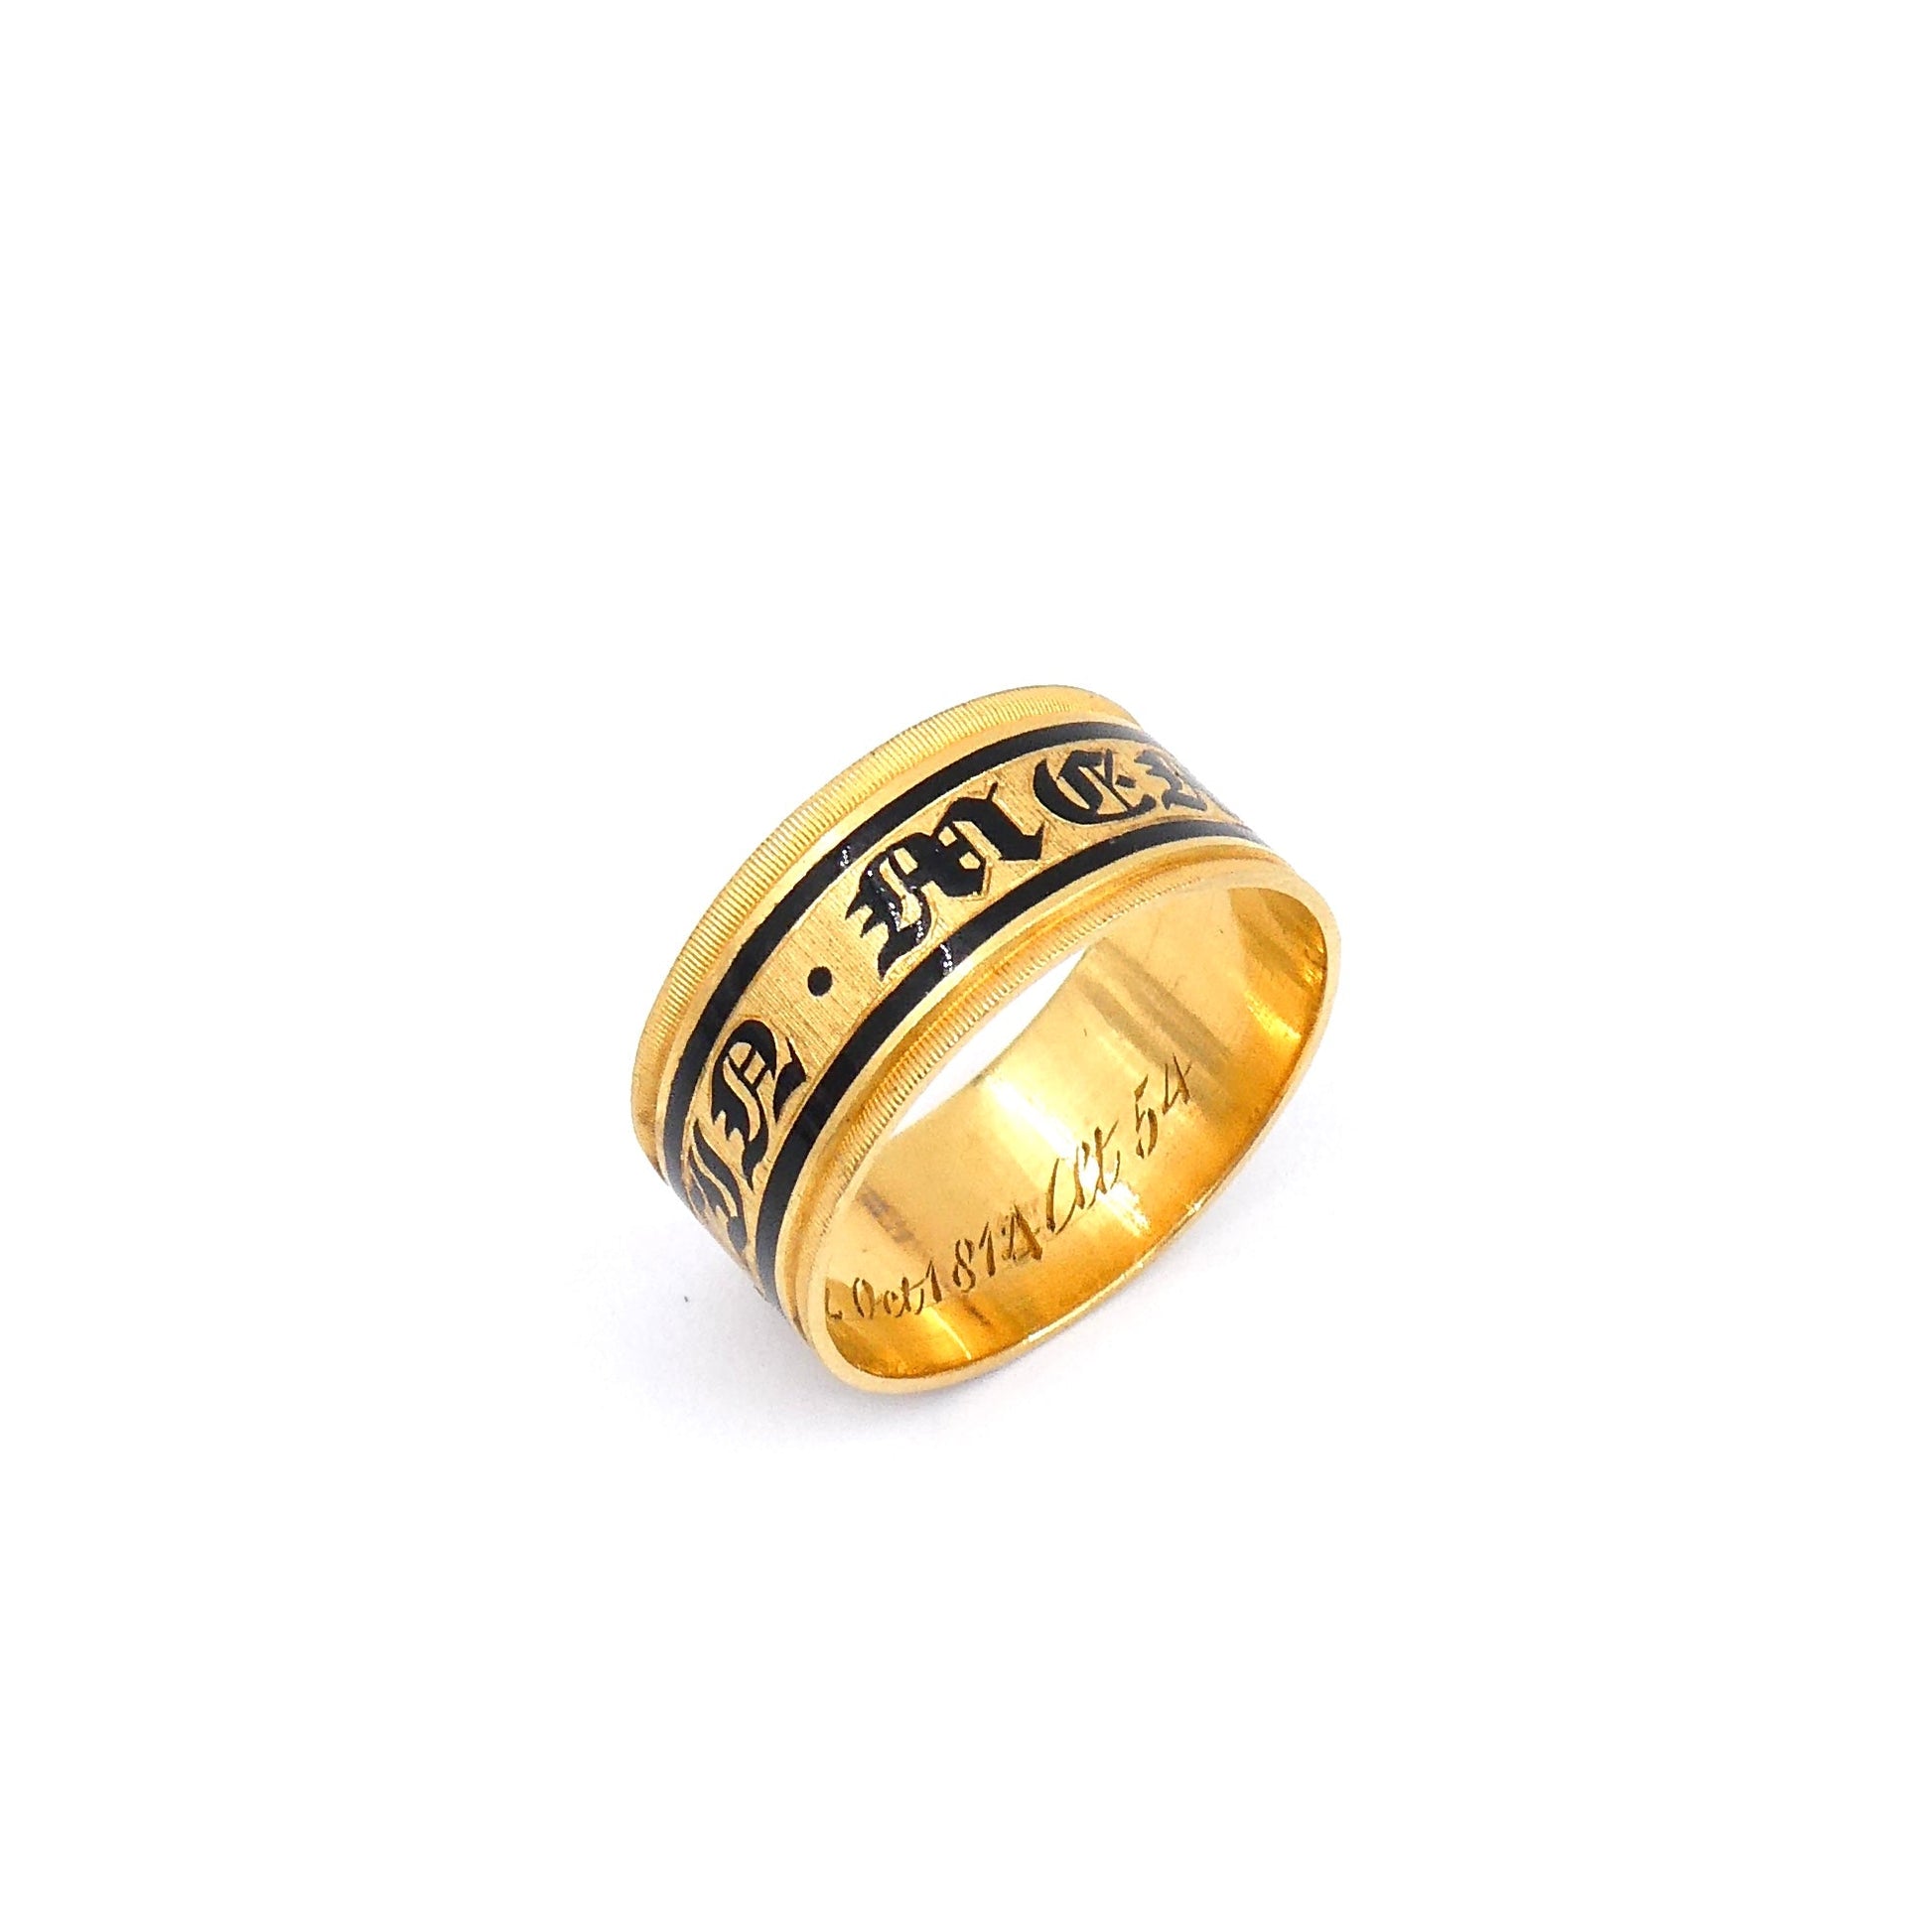 Georgian Mourning band, a gold and black enamel ring from 1814, inscribed on the inside. - Collected